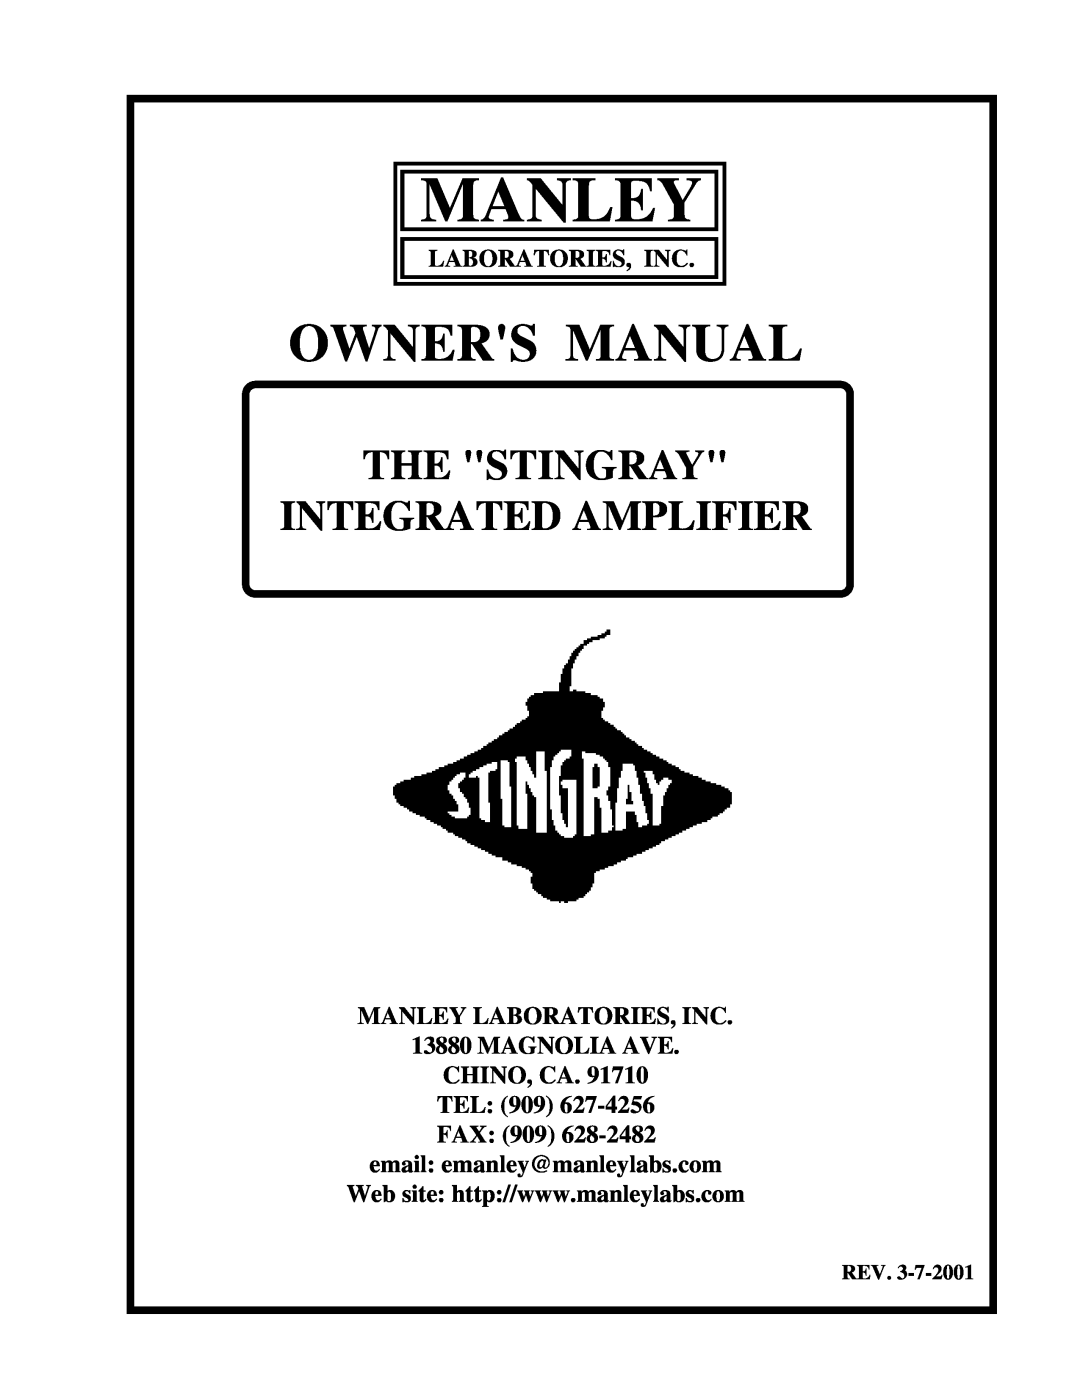 Manley Labs INTEGRATED AMPLIFIER owner manual Laboratories, Inc, MANLEY LABORATORIES, INC 13880 MAGNOLIA AVE, Manley 